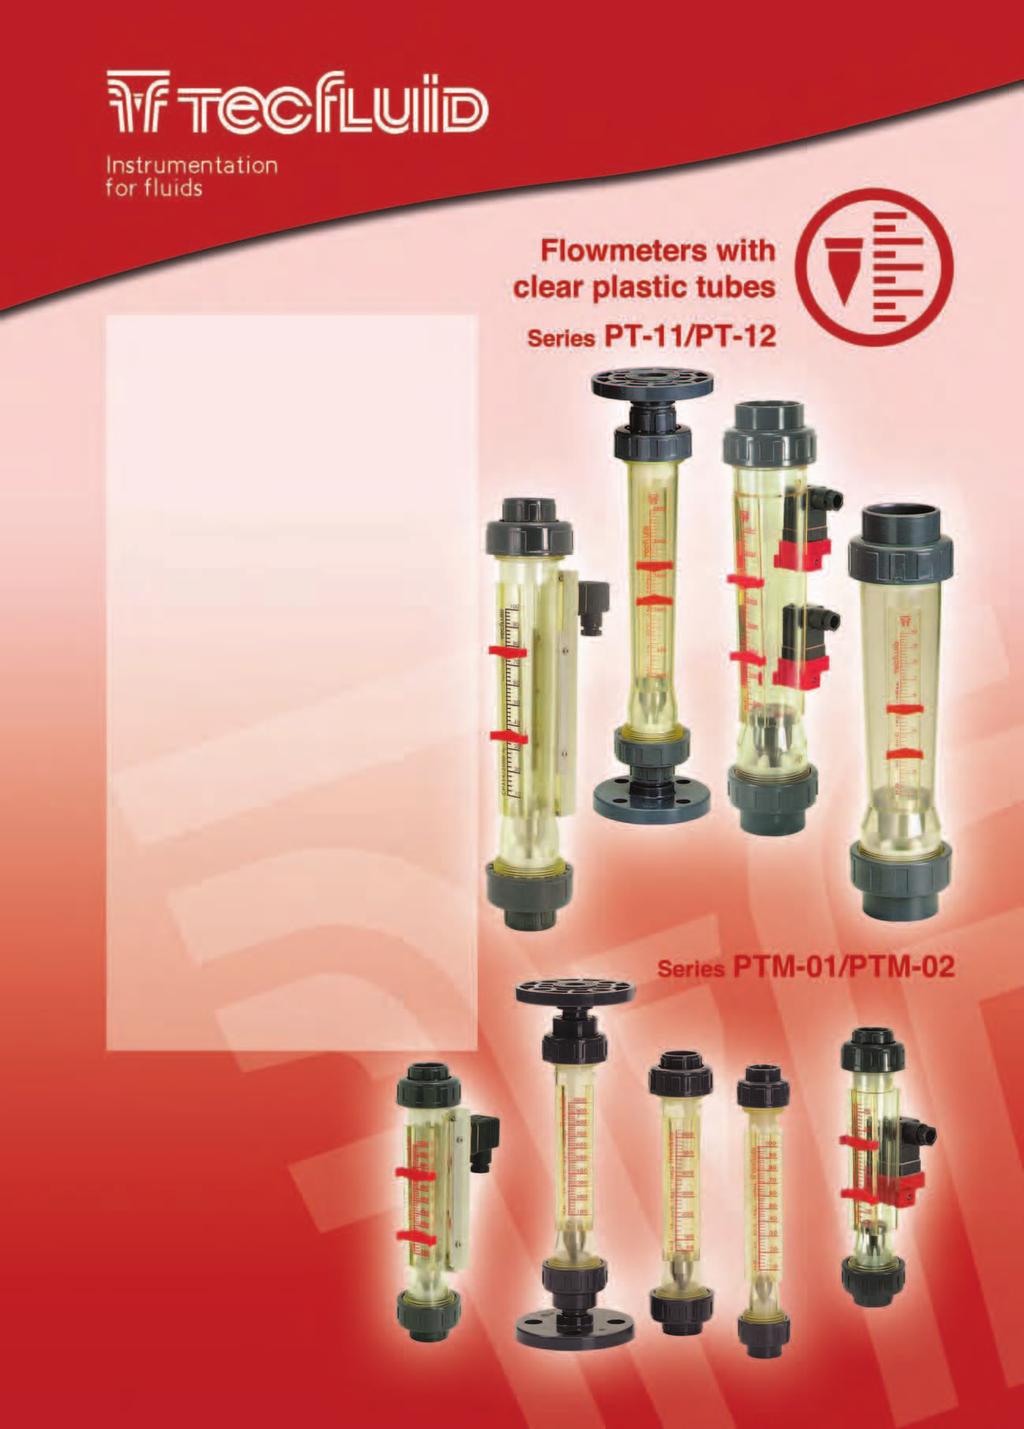 Plastic Flow Meters for gases & liquids, using TROGAMID* & POYSUFONE Technology Applications Monitoring & Control of processes for: Water & Waste Water Treatment Chemical, Petrochemical & Paper